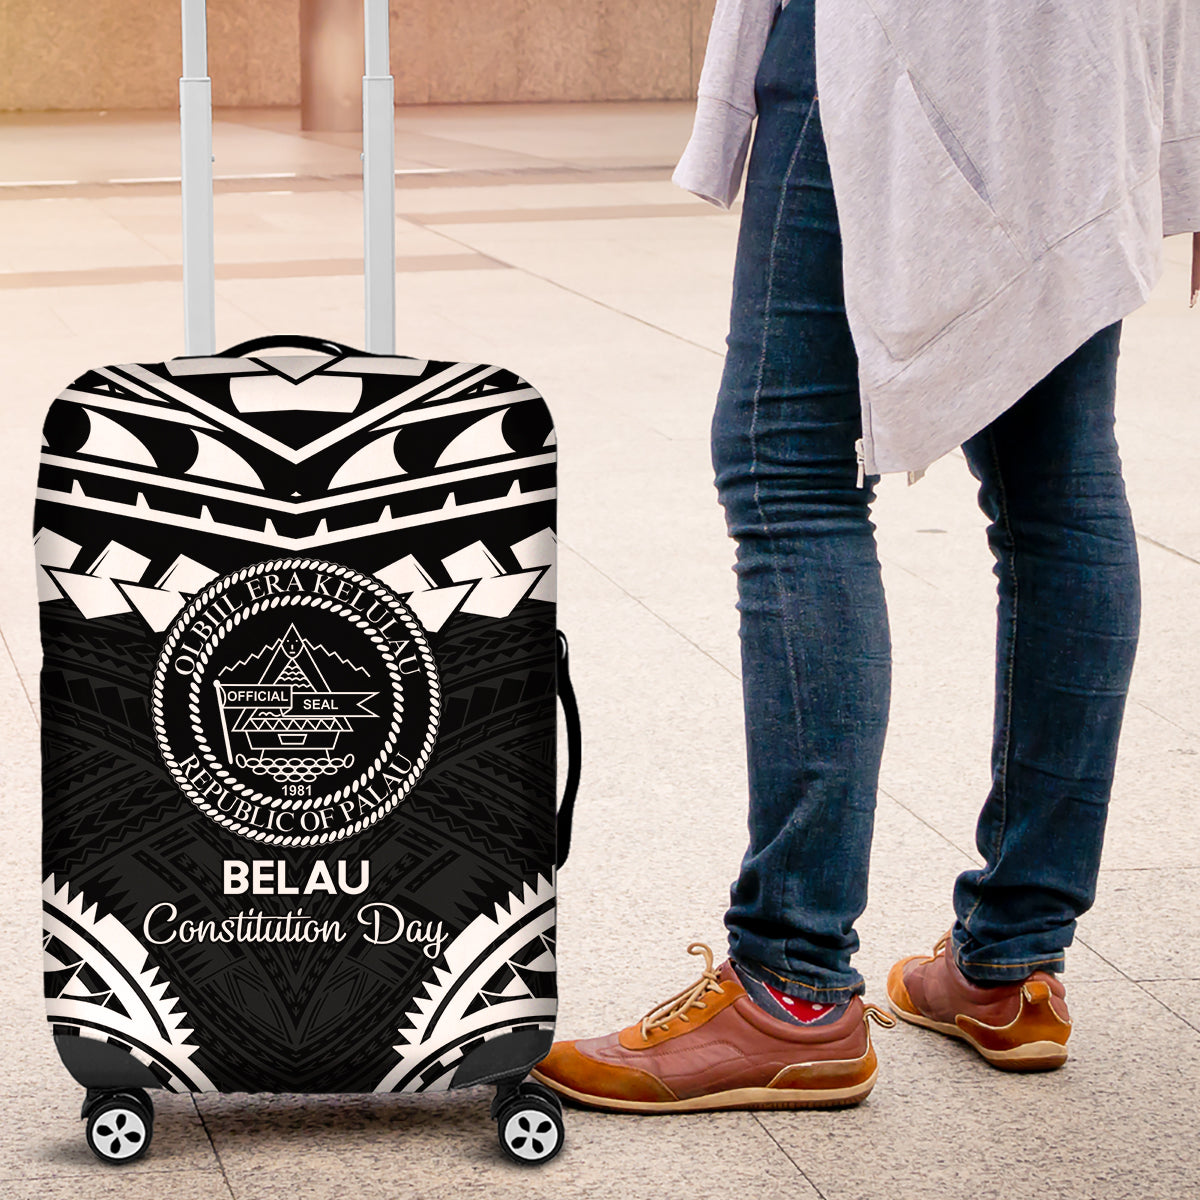 Palau Constitution Day Luggage Cover Belau Seal With Polynesian Pattern - Black